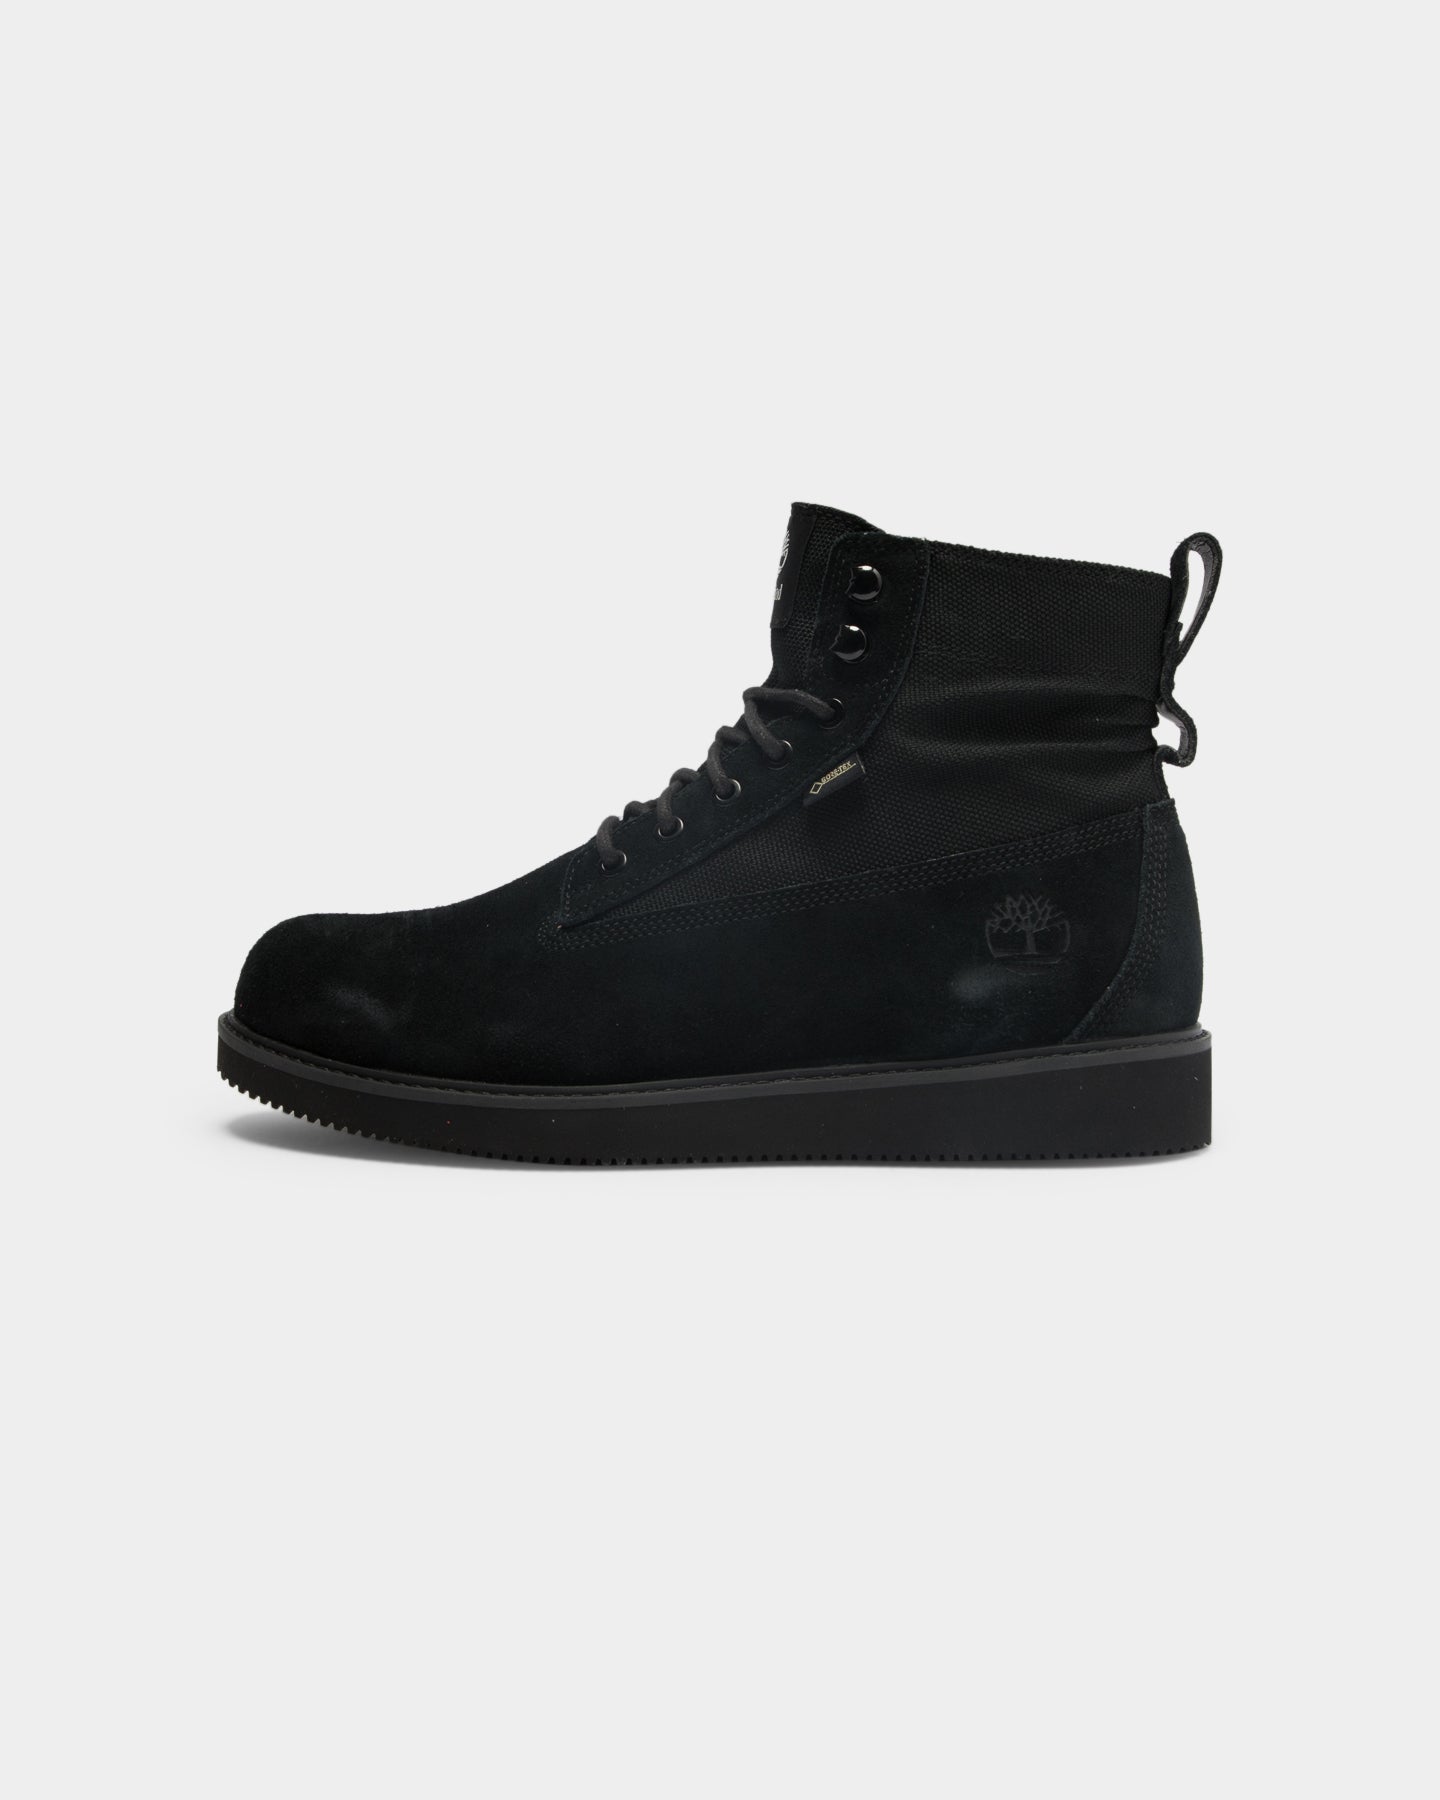 suede black timberland boots